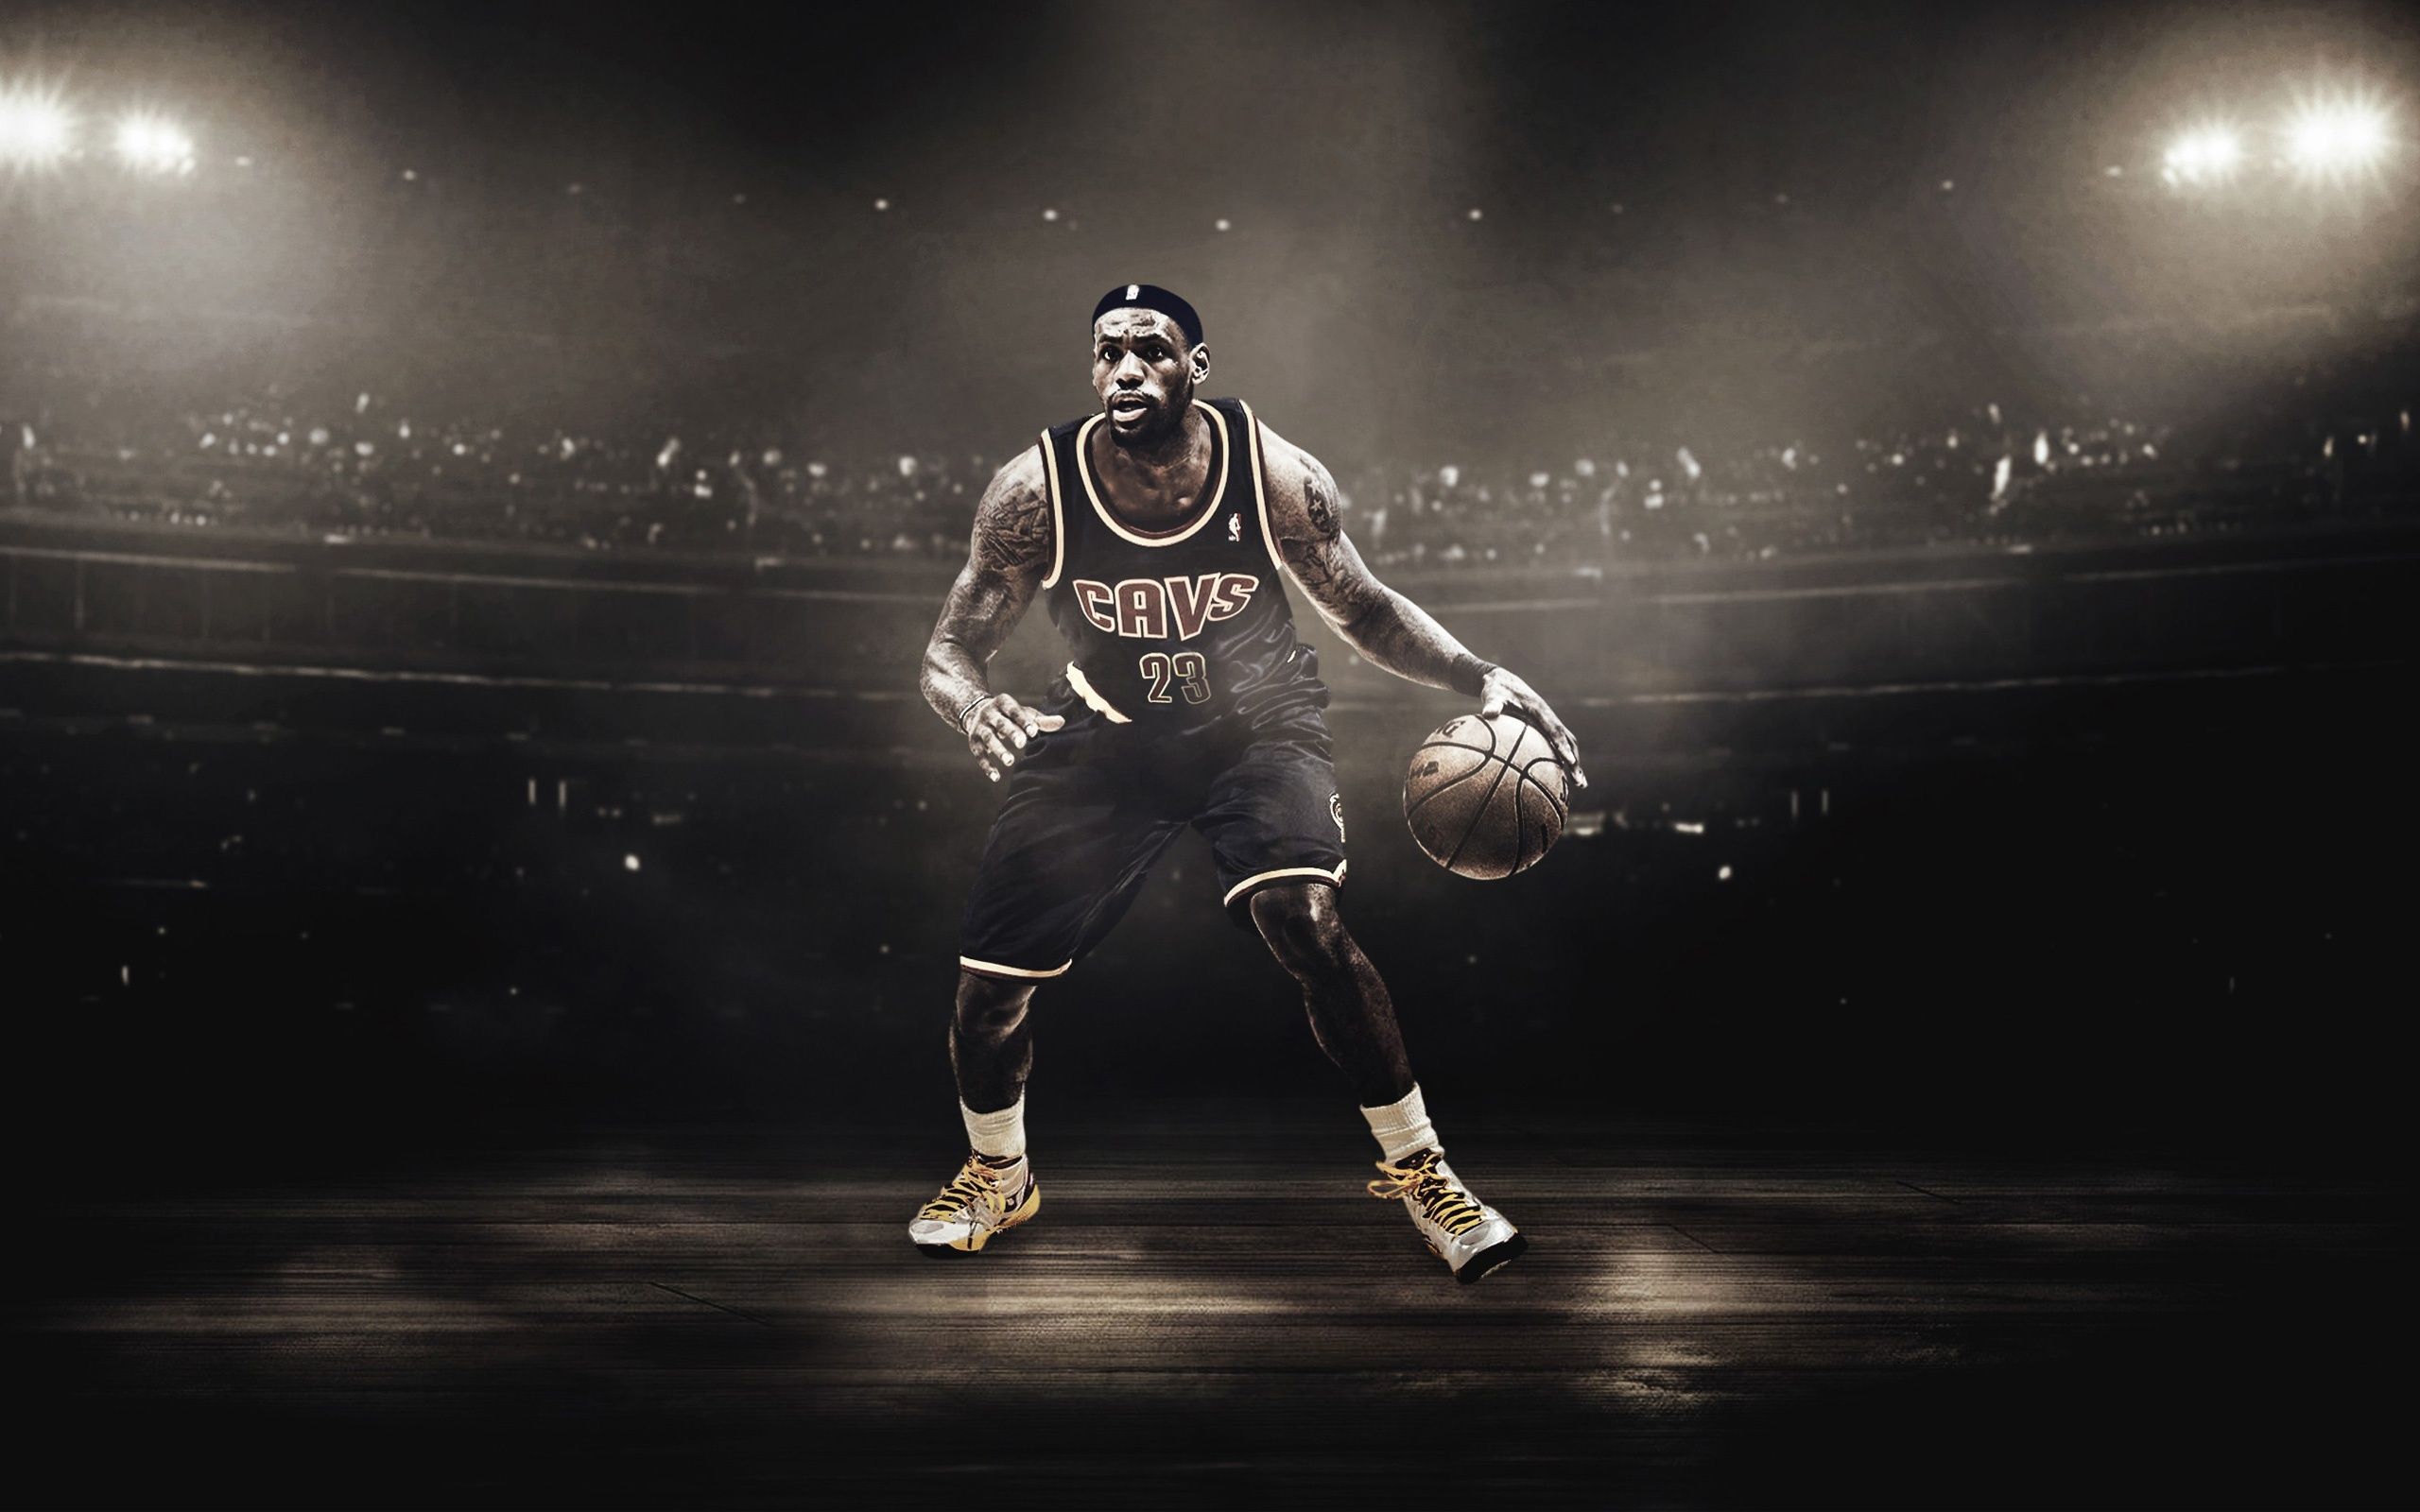 LeBron James Basketball Player Wallpaper in jpg format for free download